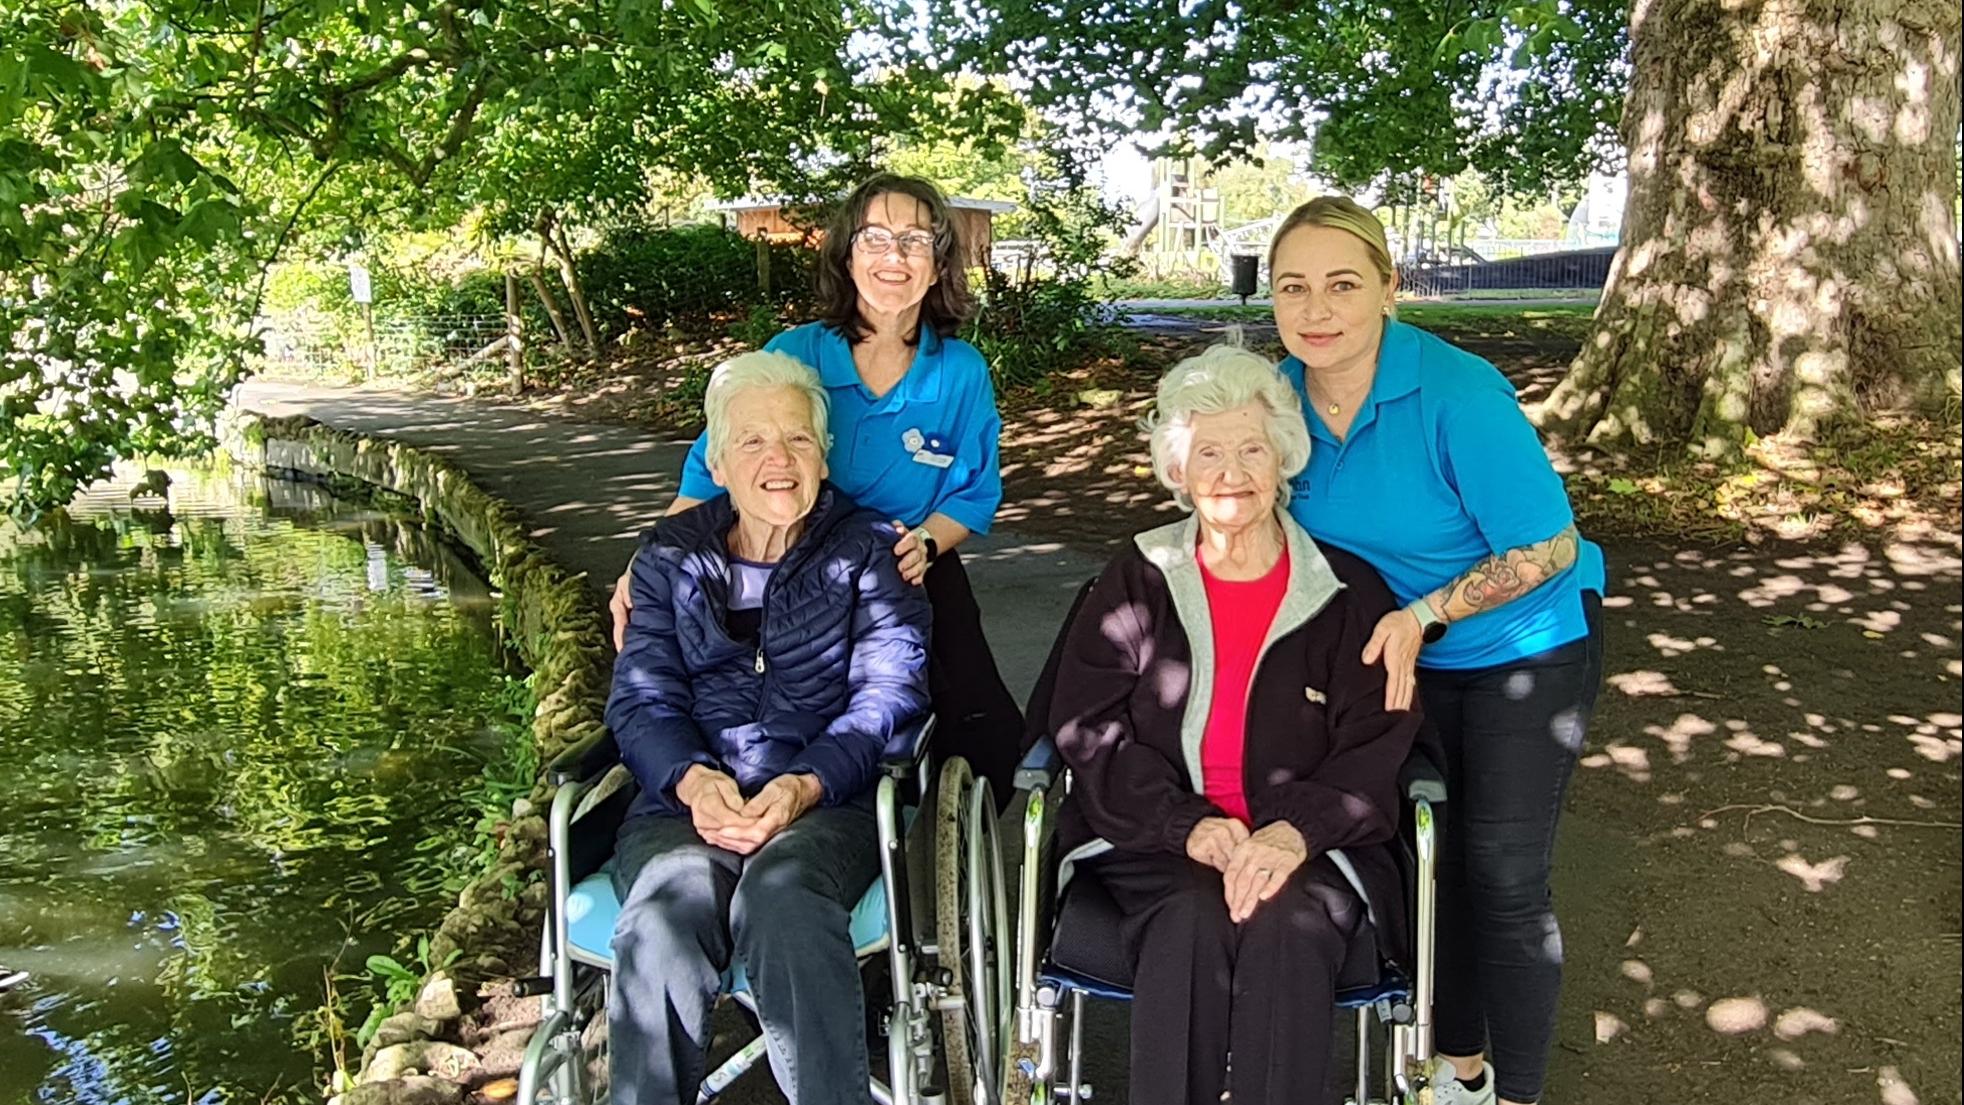 Windsor Street Residents on a visit to the park with ACs Charo and Bea